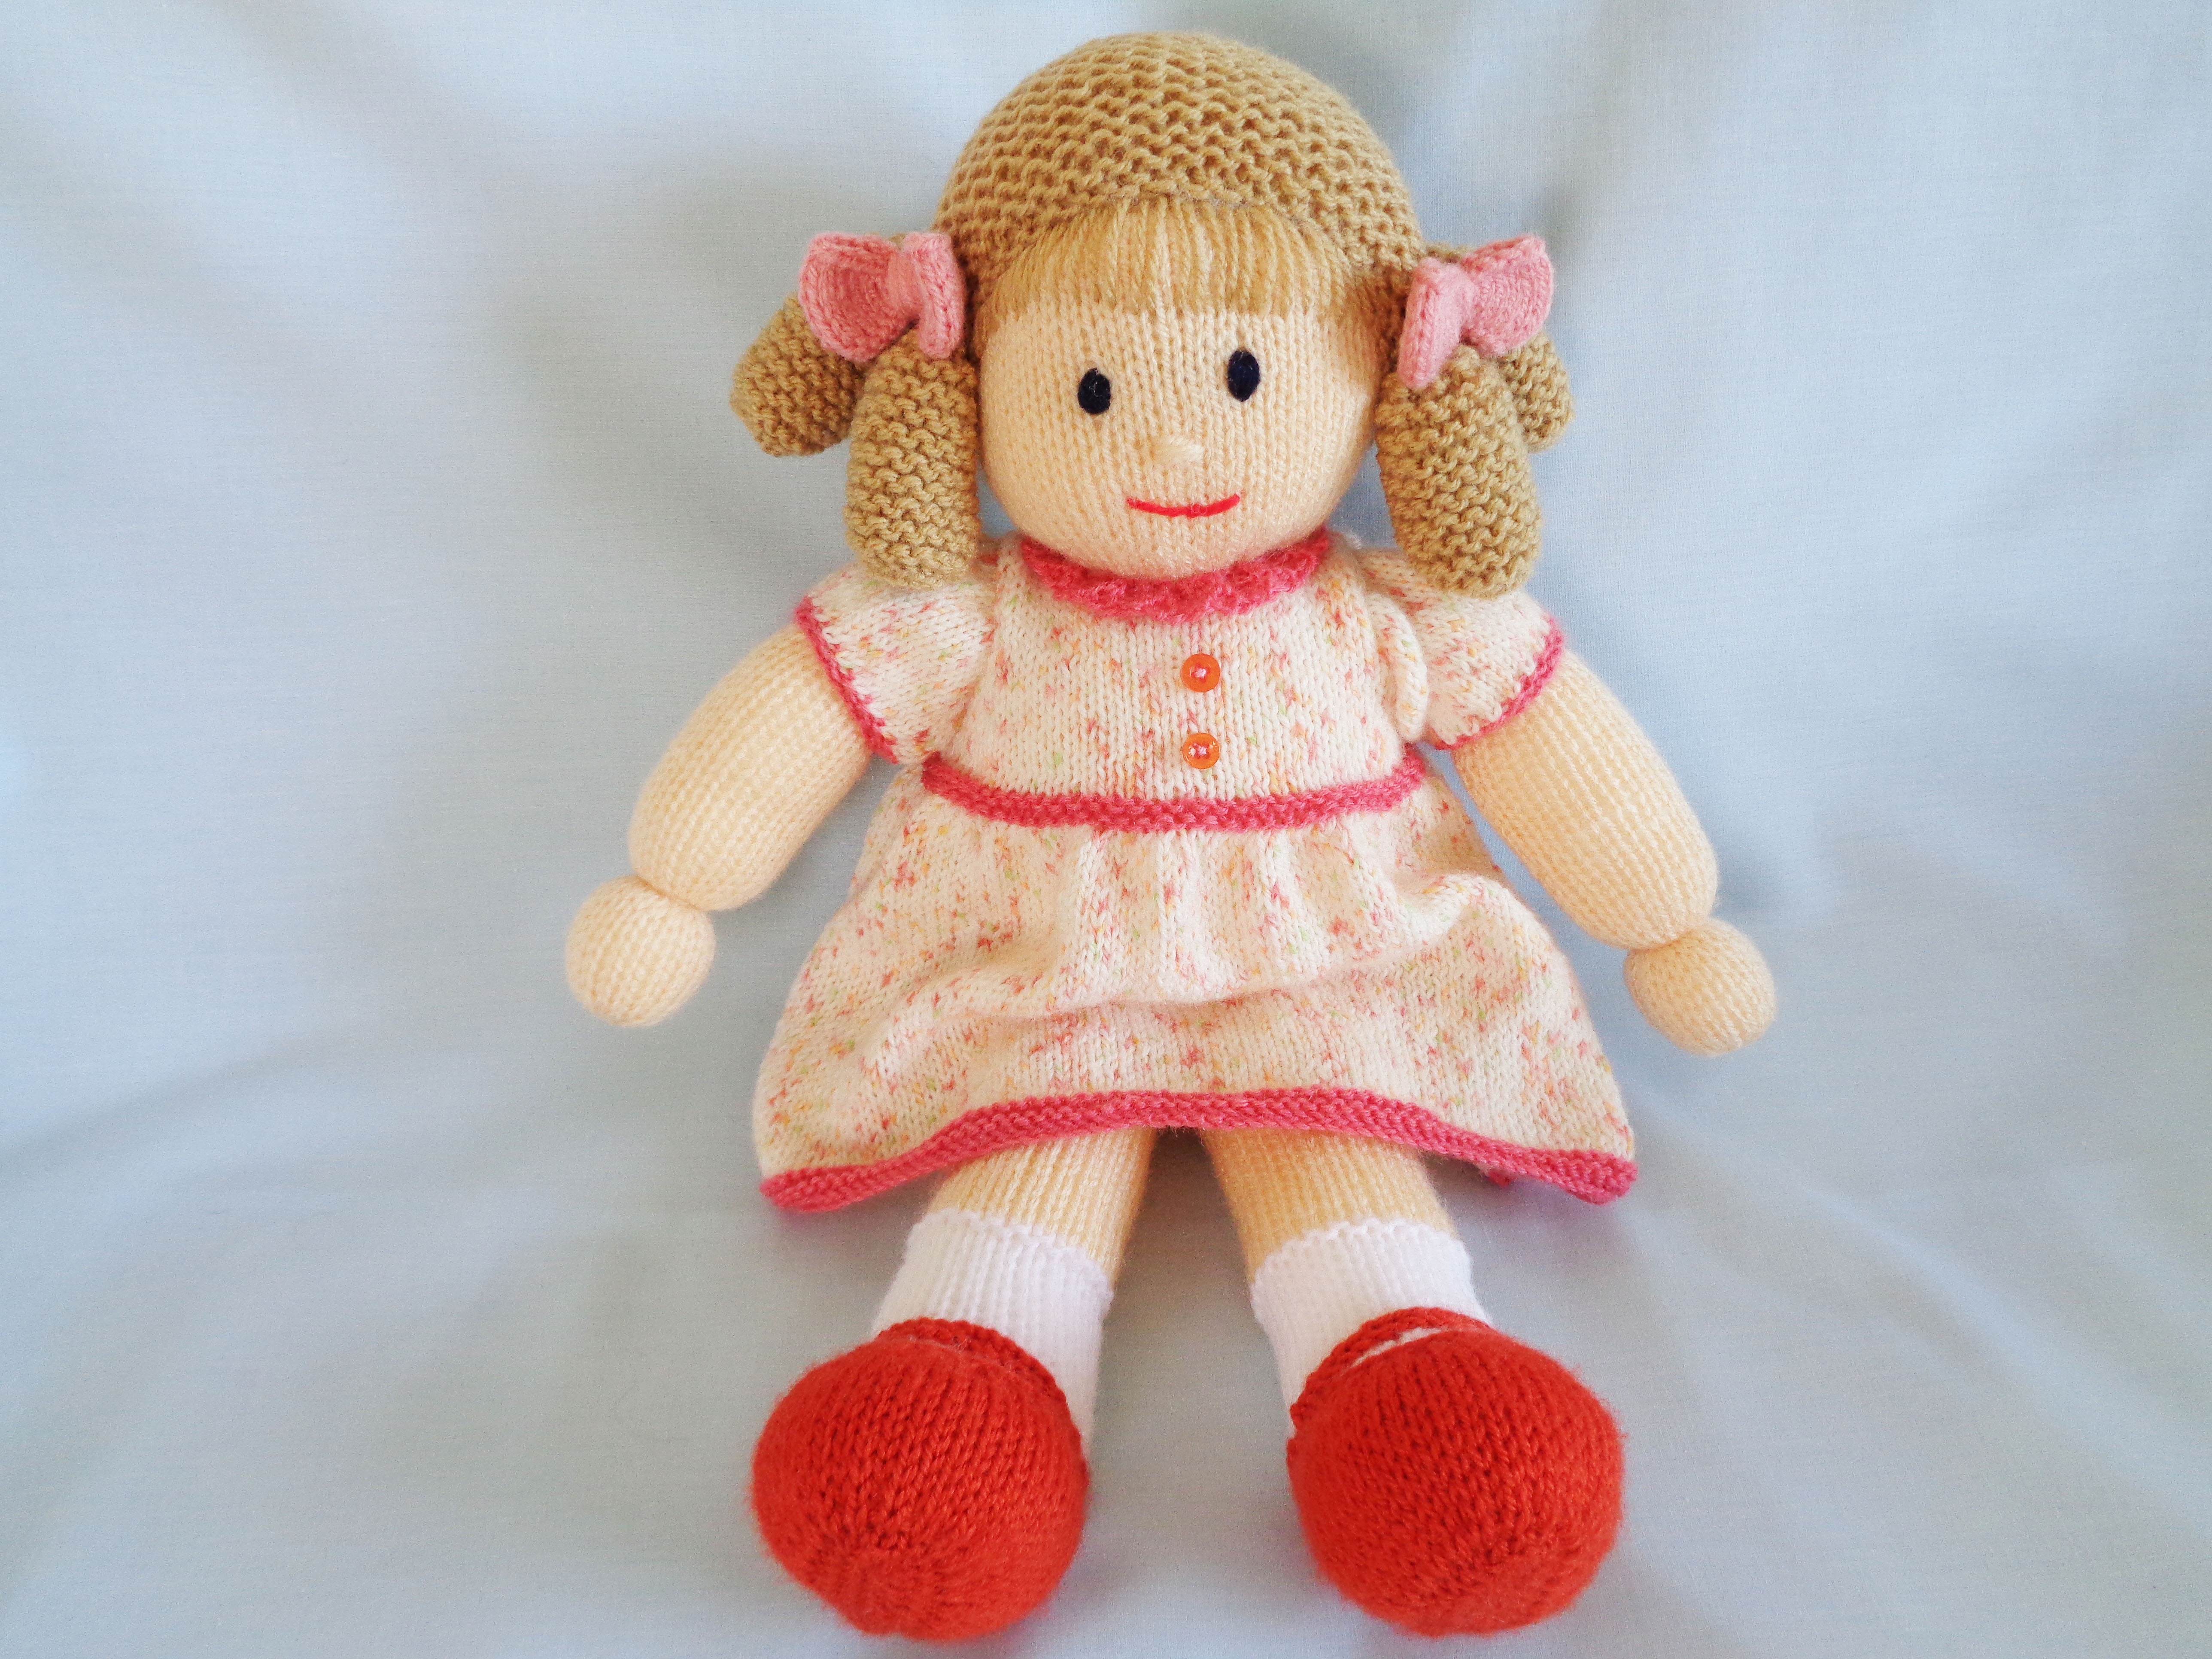  Hand Knitted Doll soft toy 14 inch in 4 great colours by Knitted Creations £9.+ 